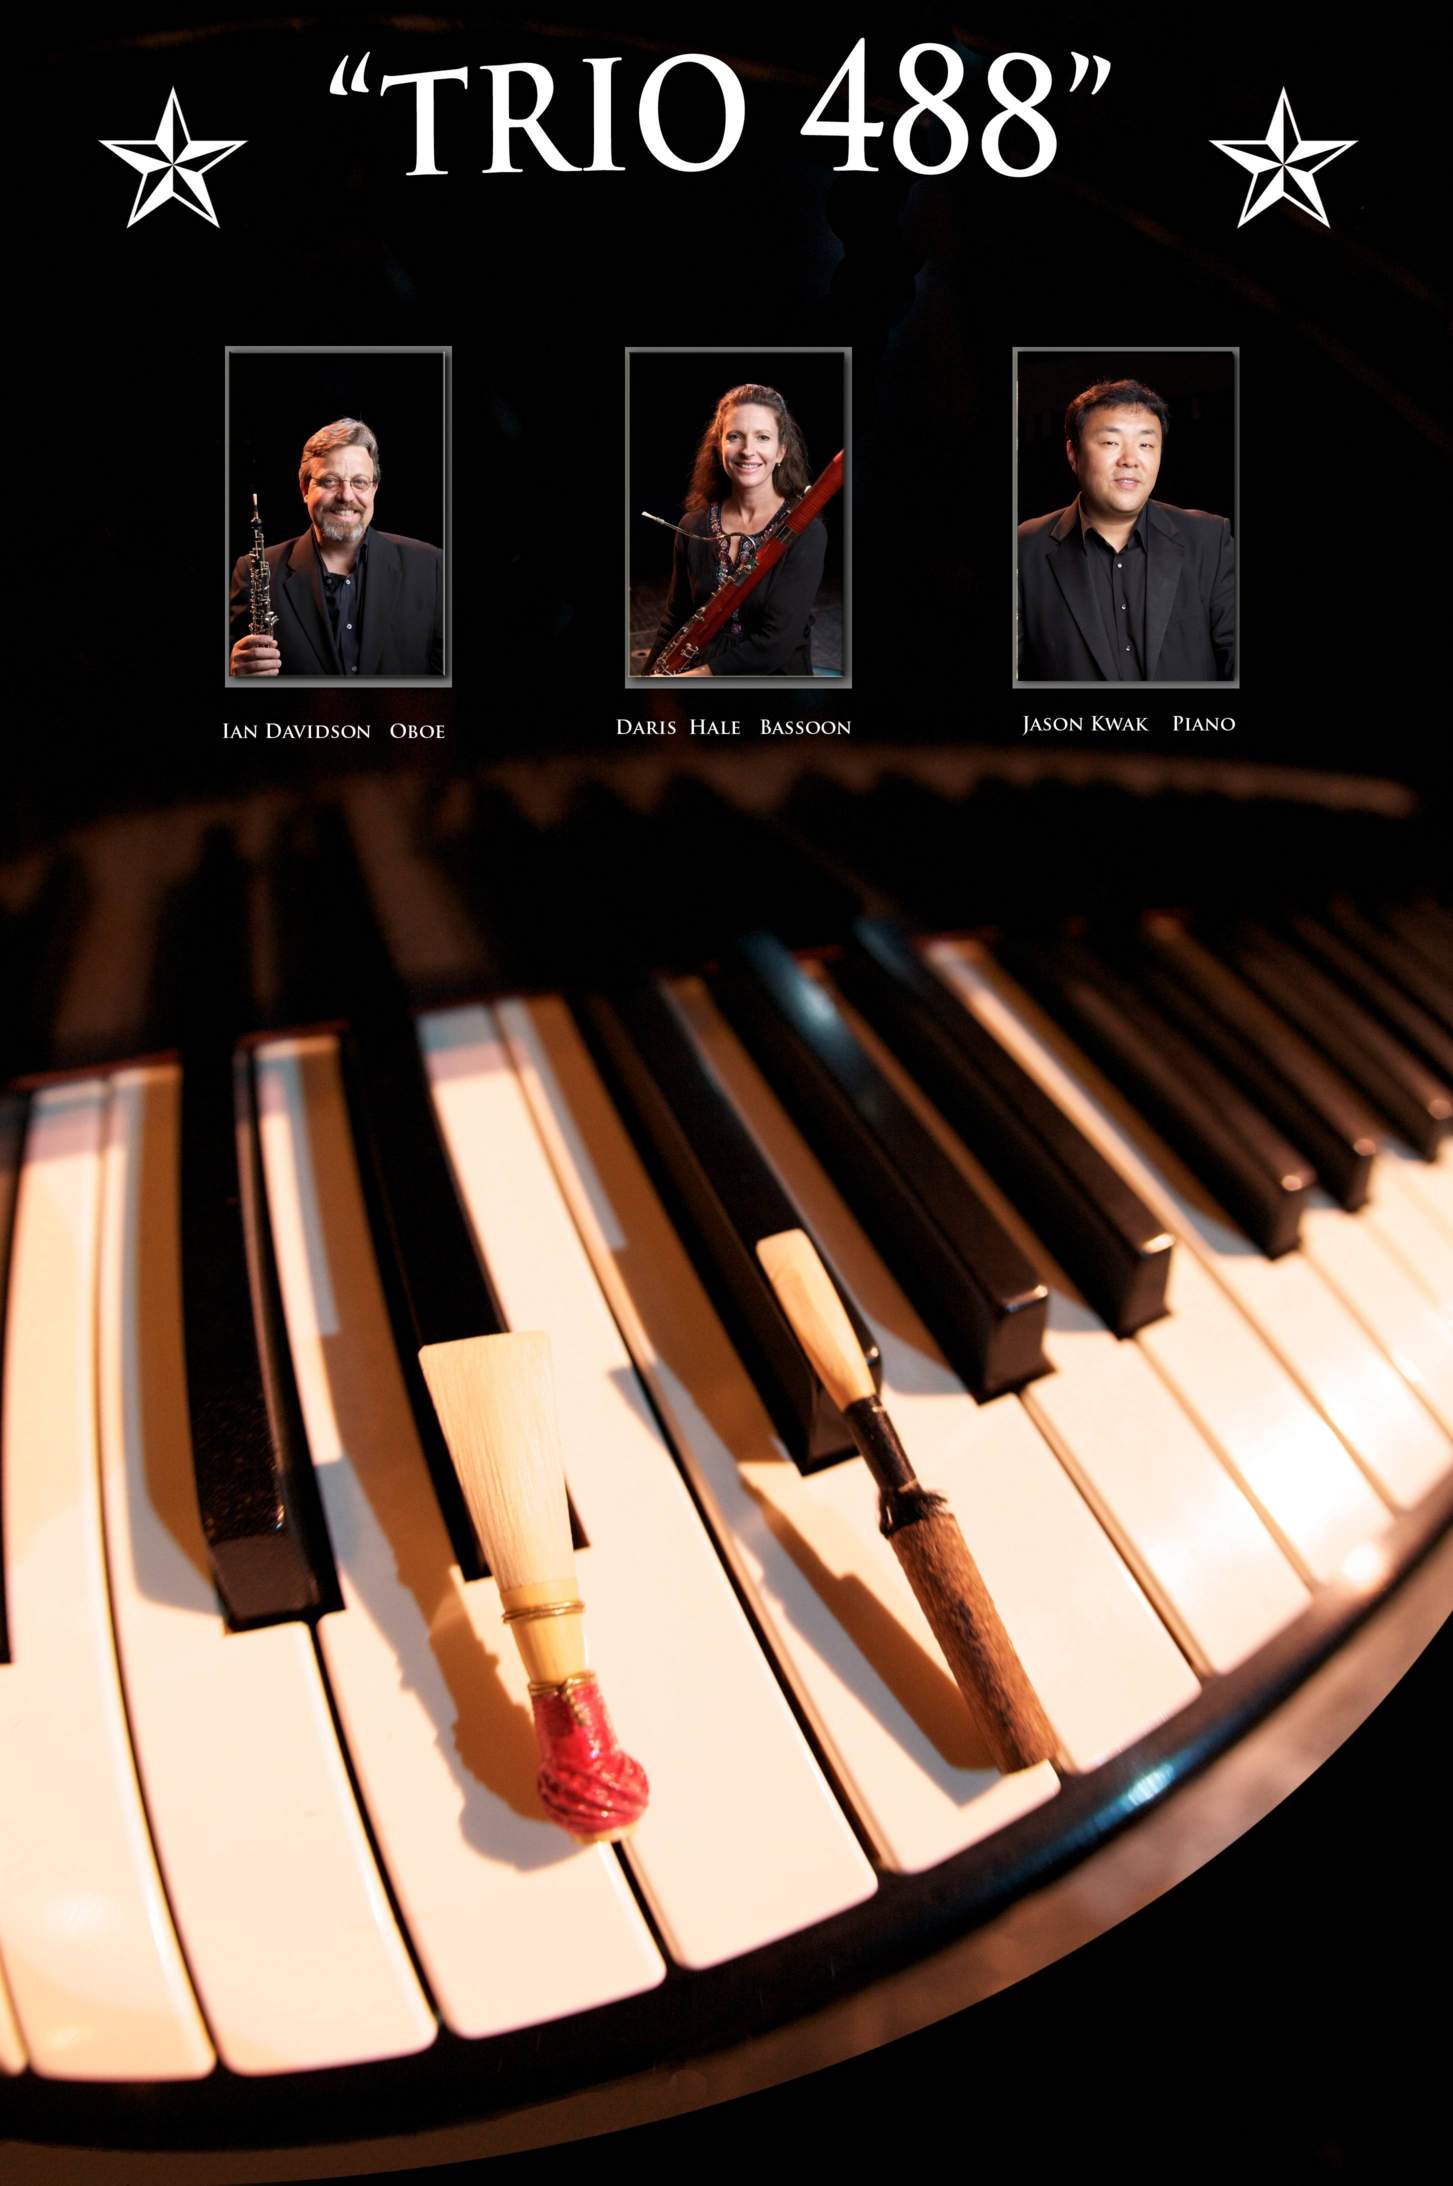 poster with head shots super imposed over a piano keyboard and reeds